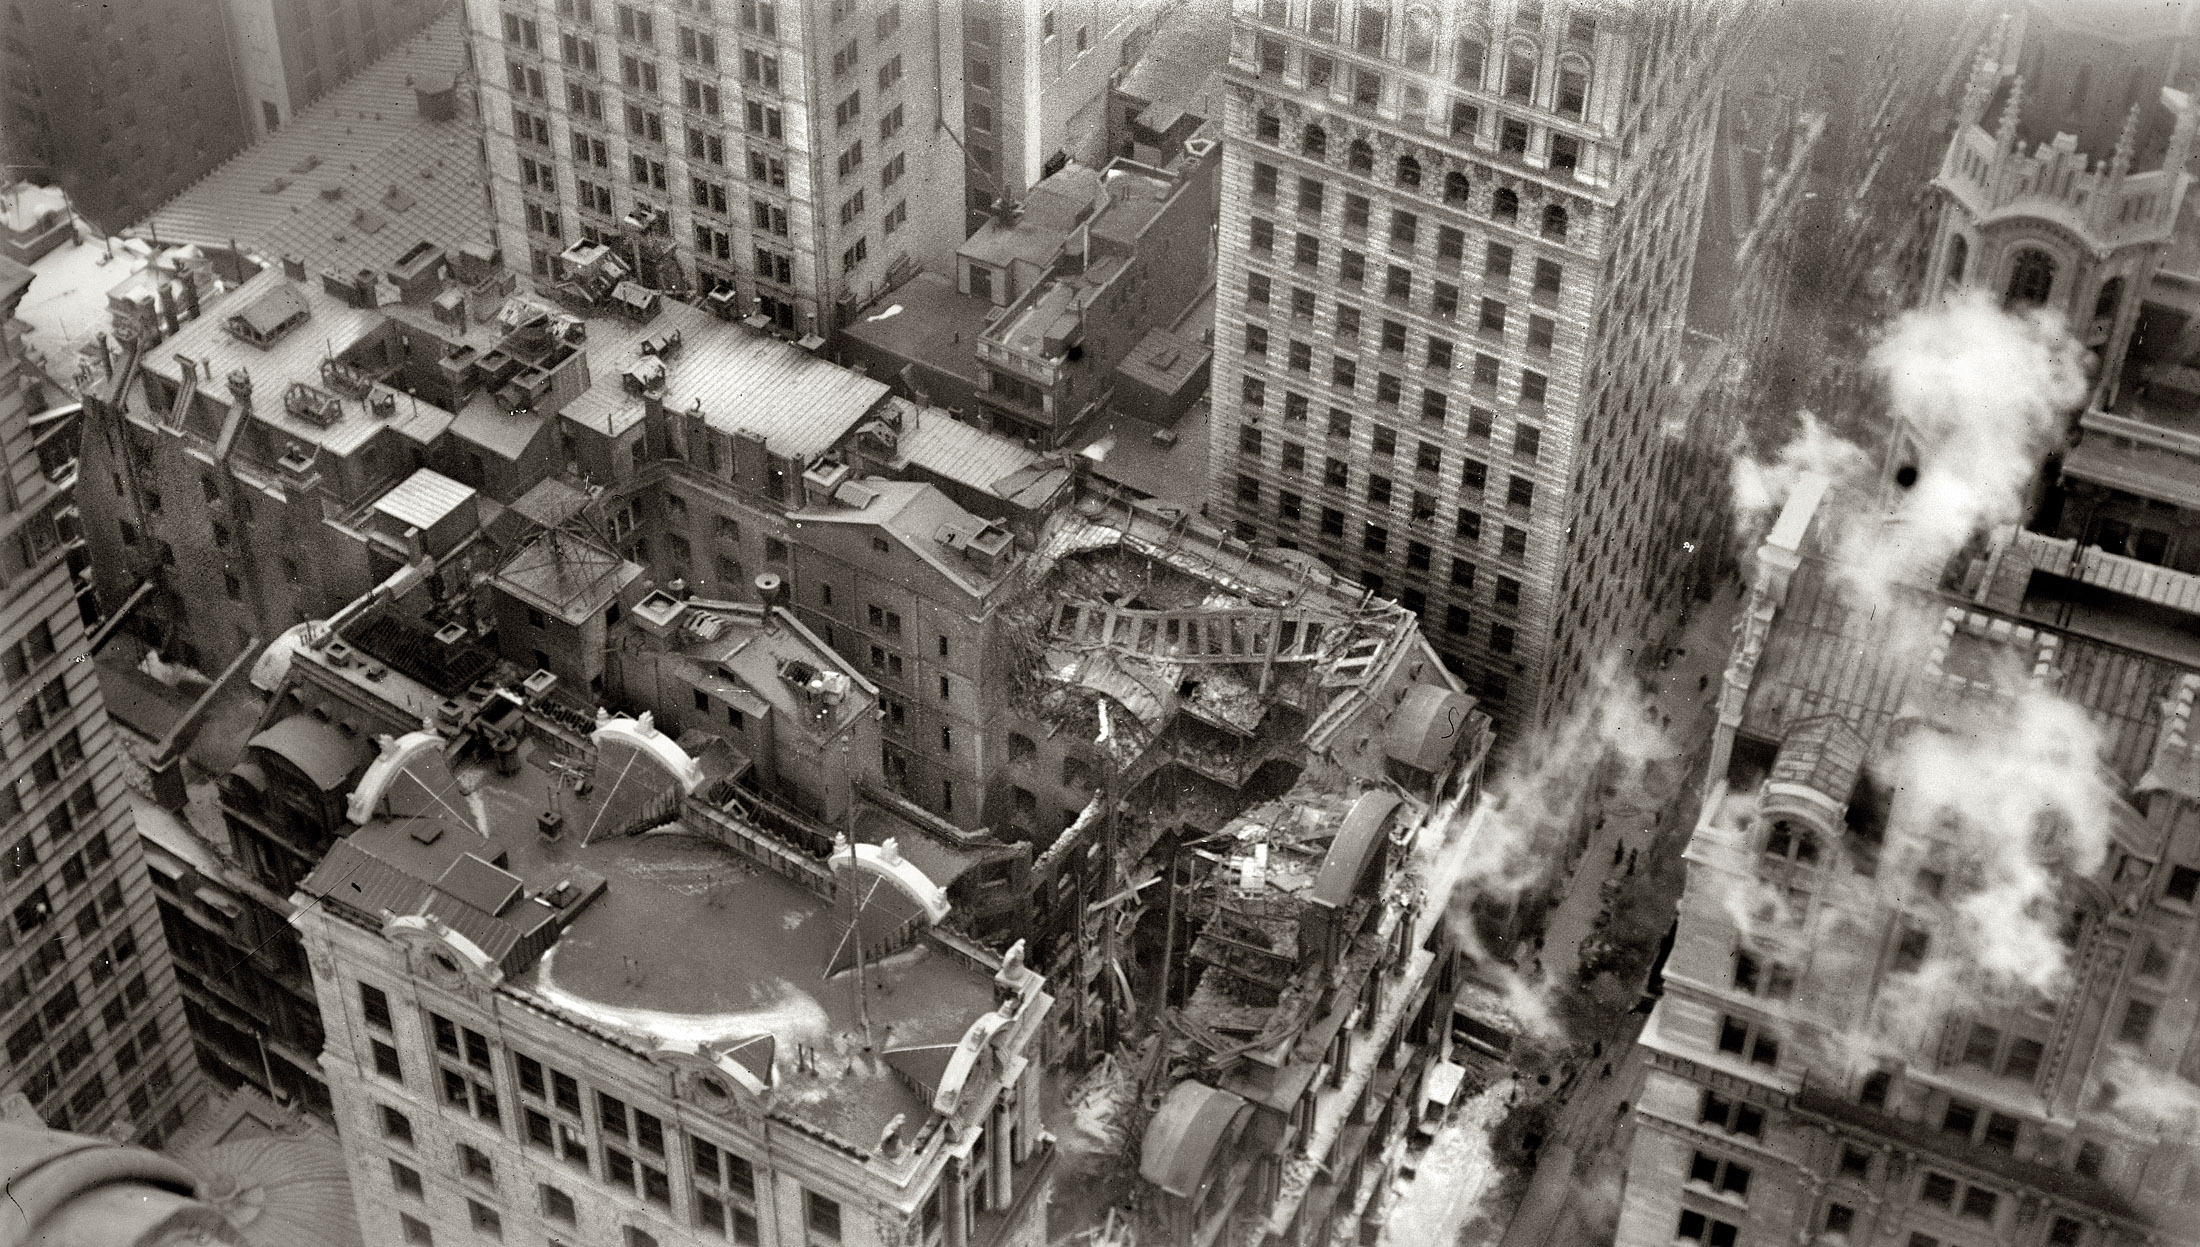 January 1912. Equitable fire as viewed from the Singer Building. View full size. 5x7 glass negative, George Grantham Bain Collection. An account of the fire.